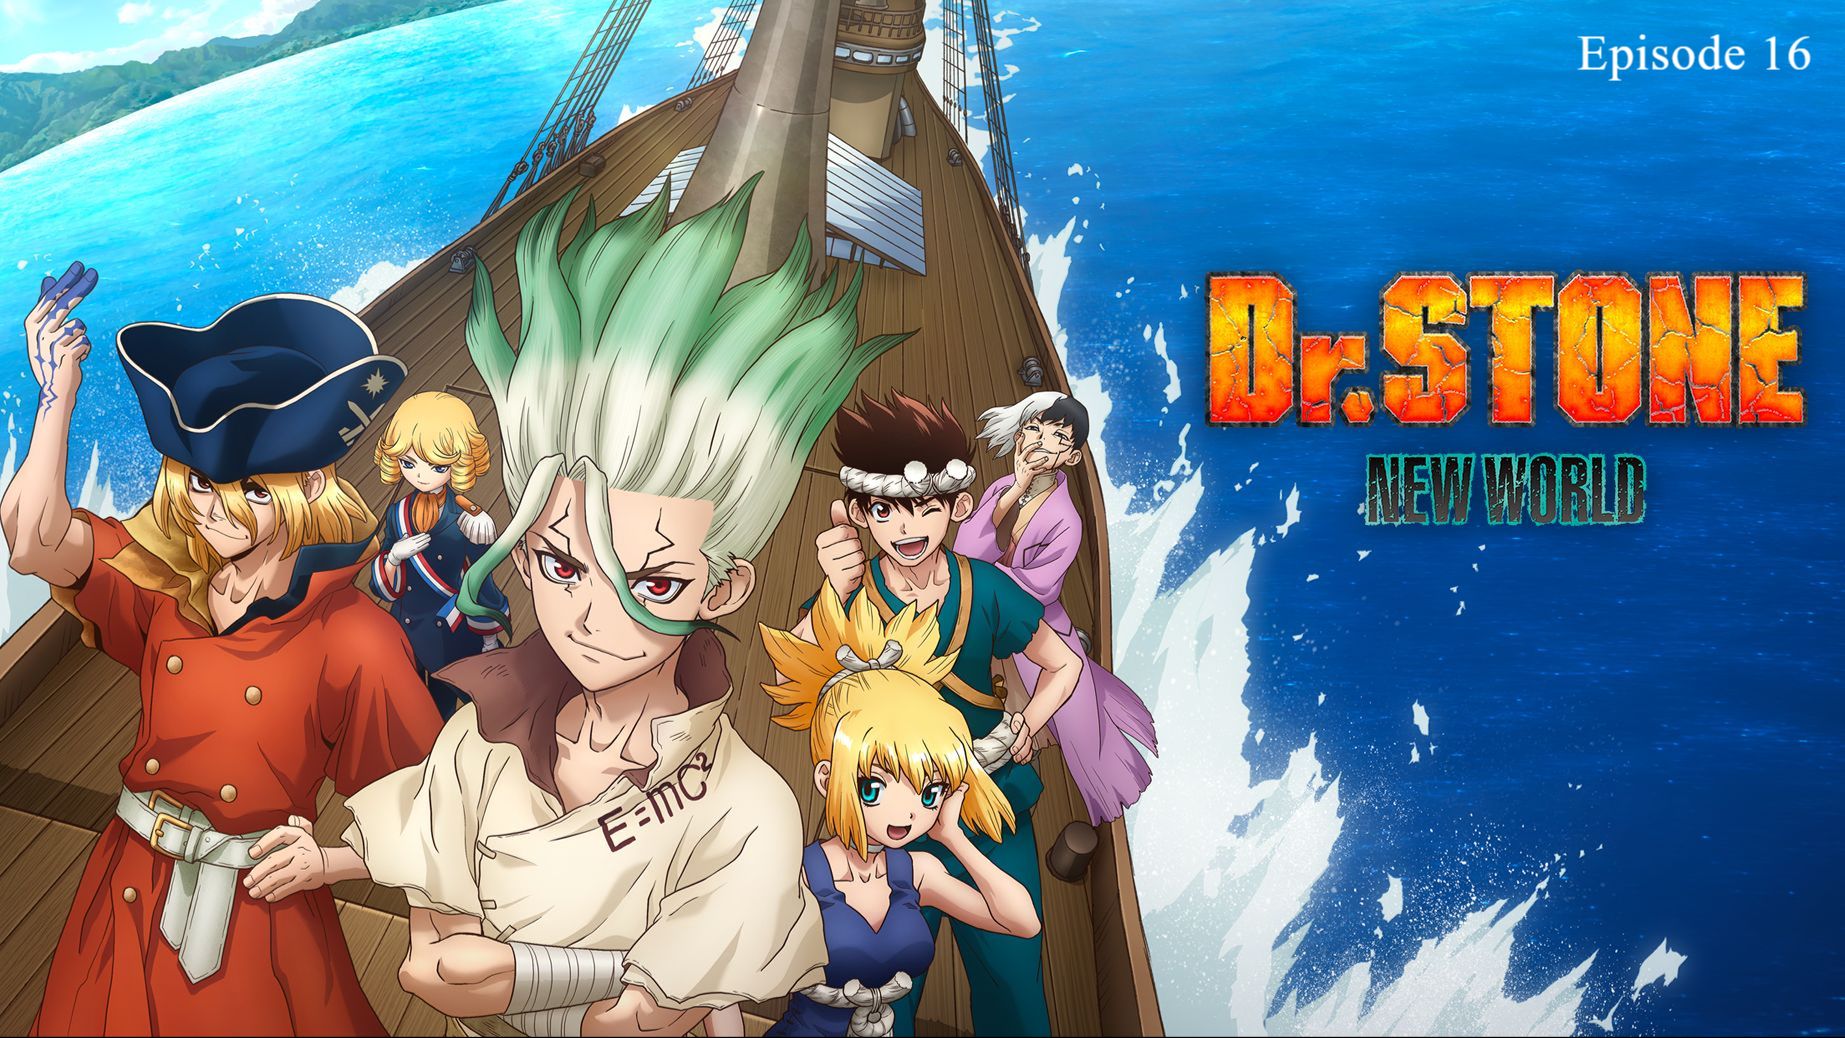 Dr. Stone Season 3: New World - What fans can expect